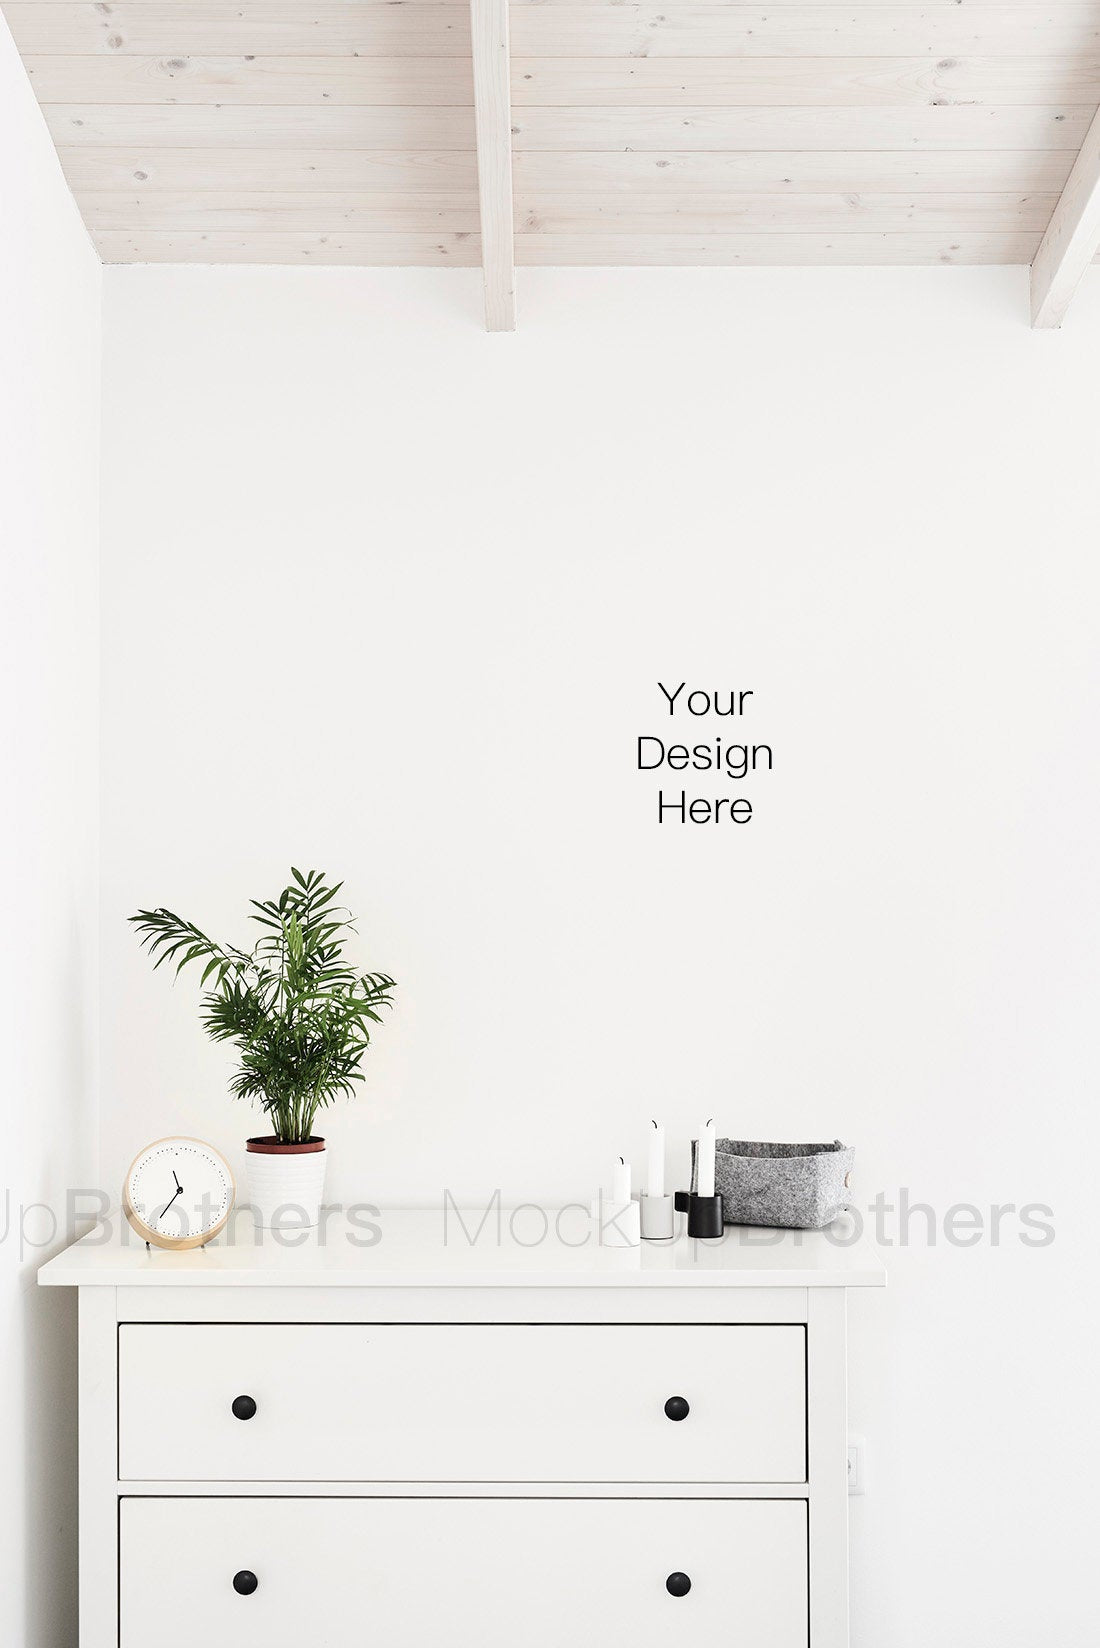 Wall mockup for large paintings by MockupBrothers